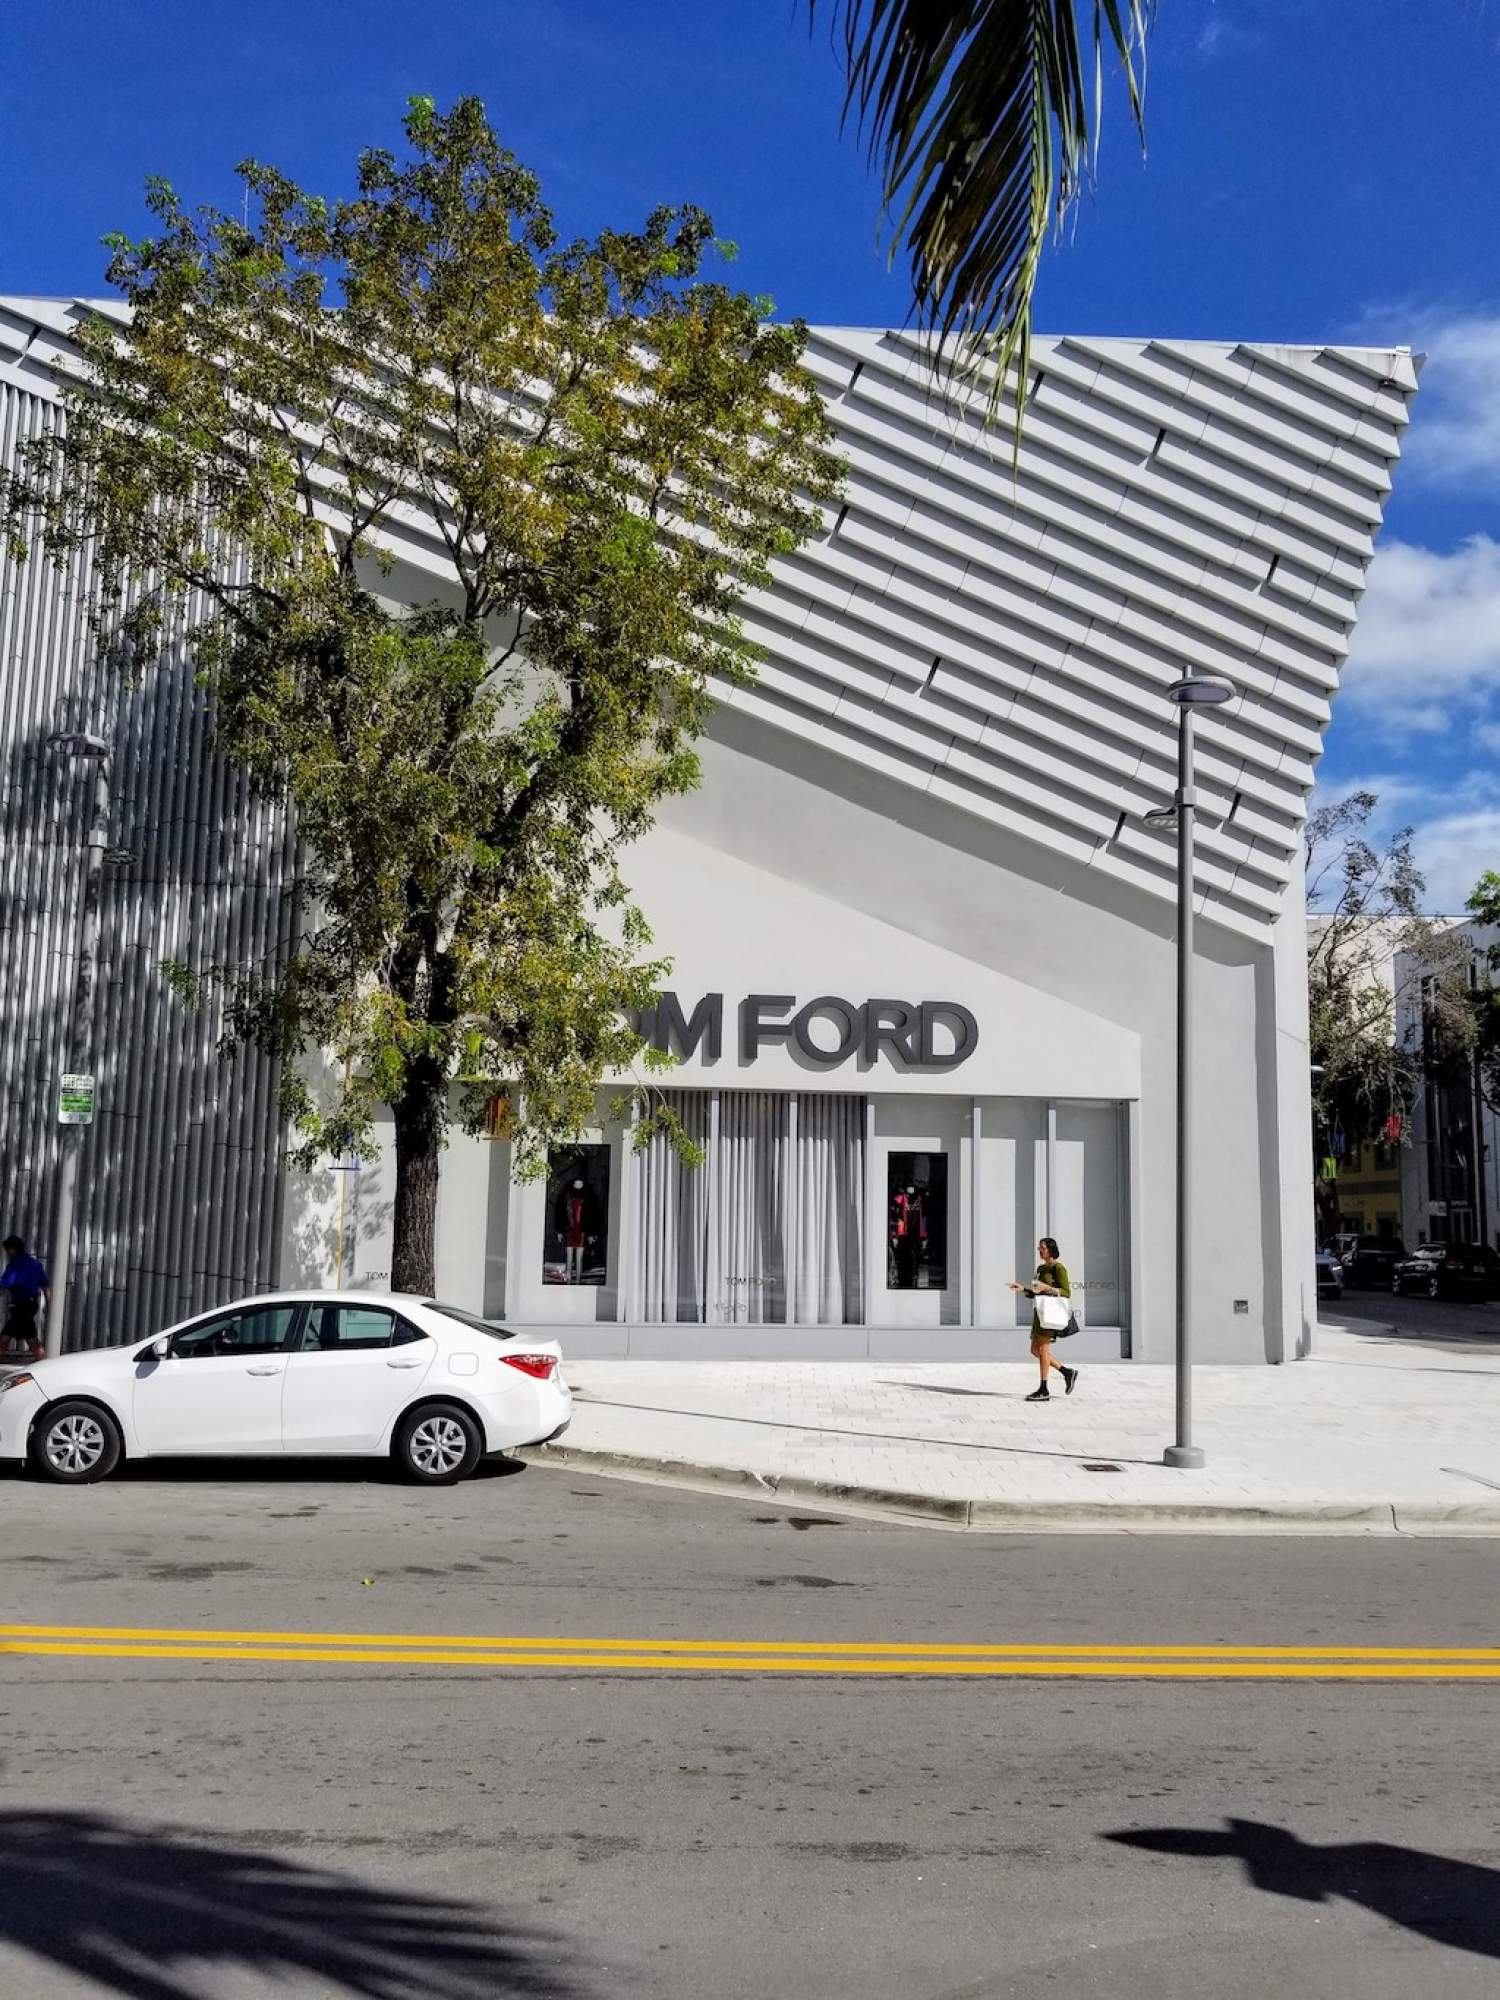 Miami Design District, a must do on any long weekend in MIami